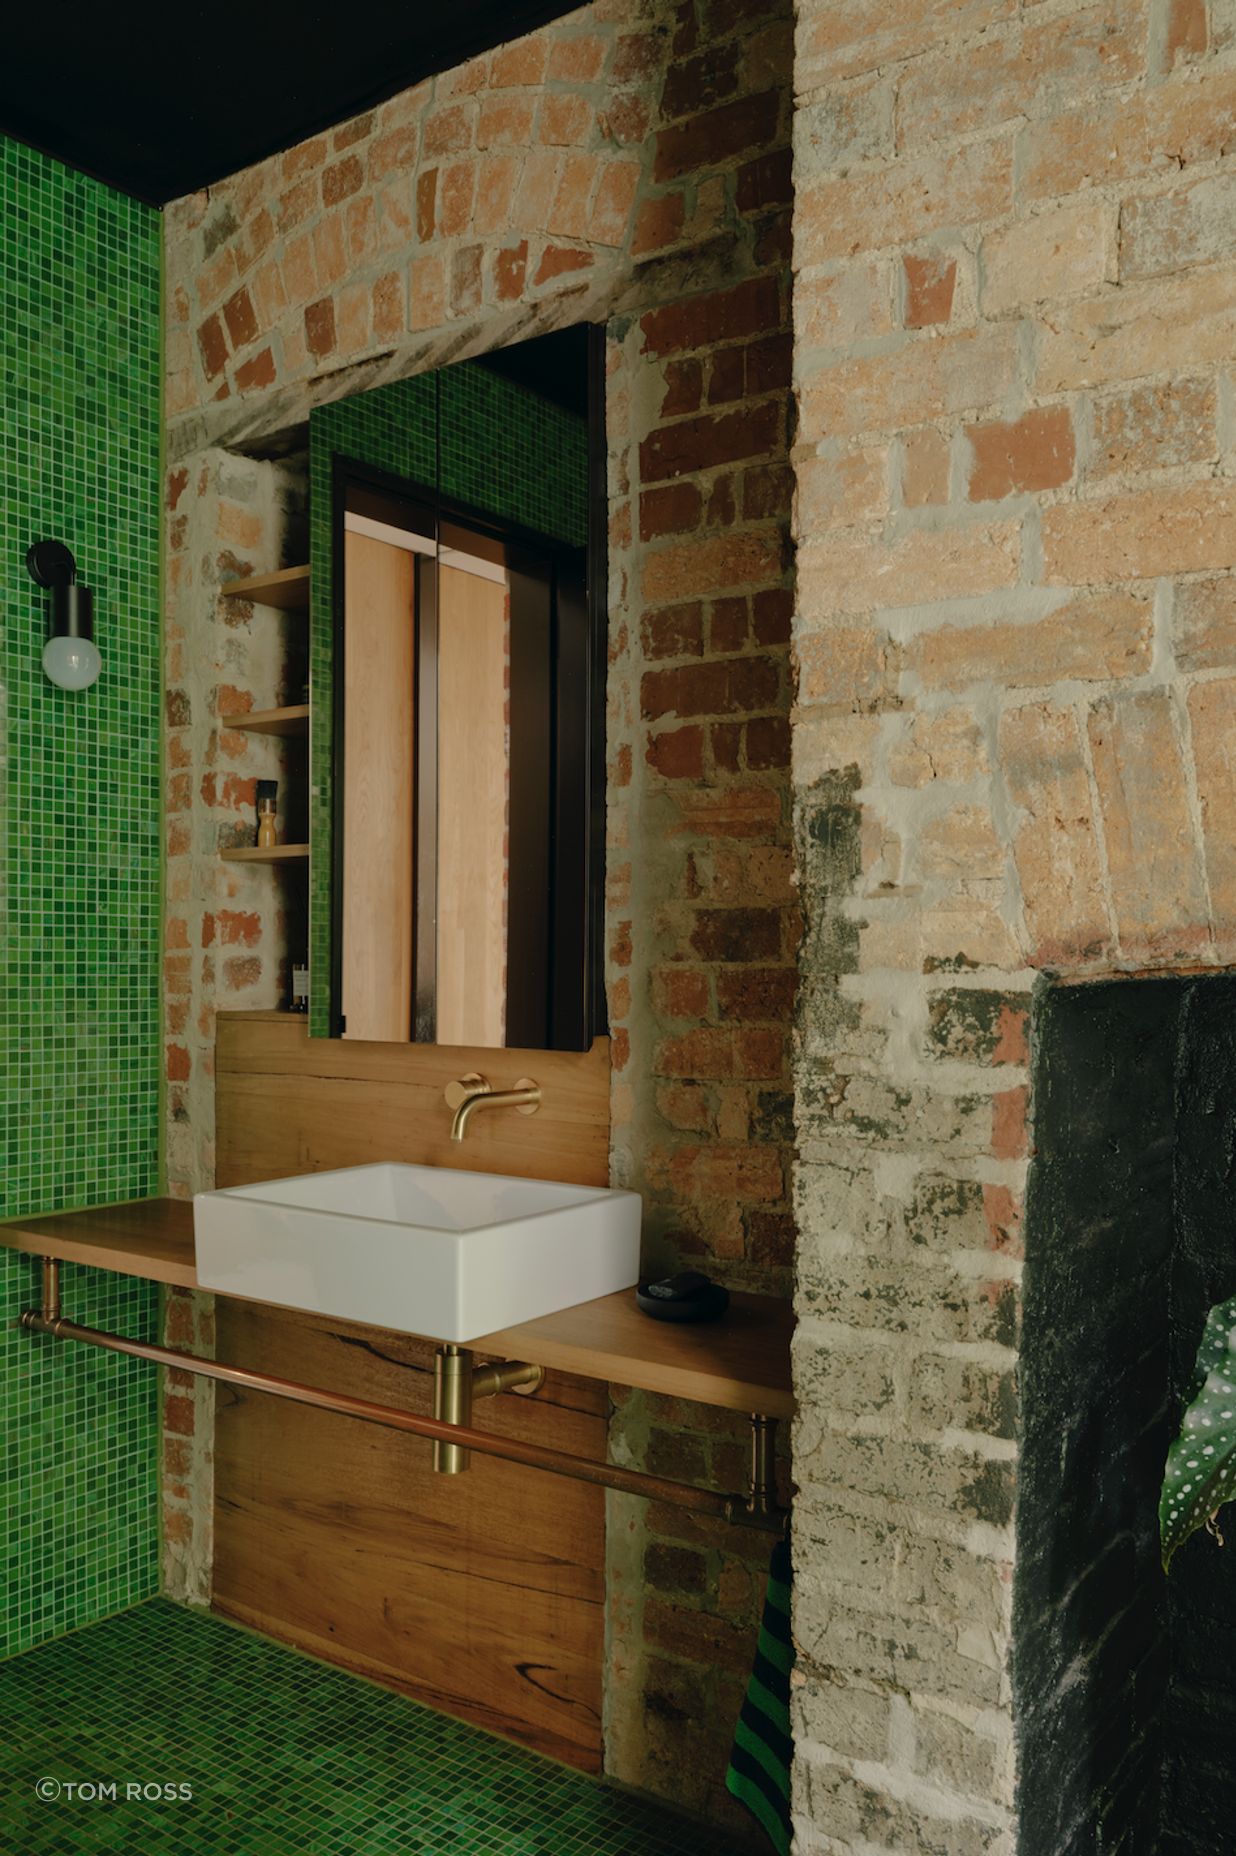 One element of the space is a particularly noteworthy design choice – a verdant green-tiled bathroom.